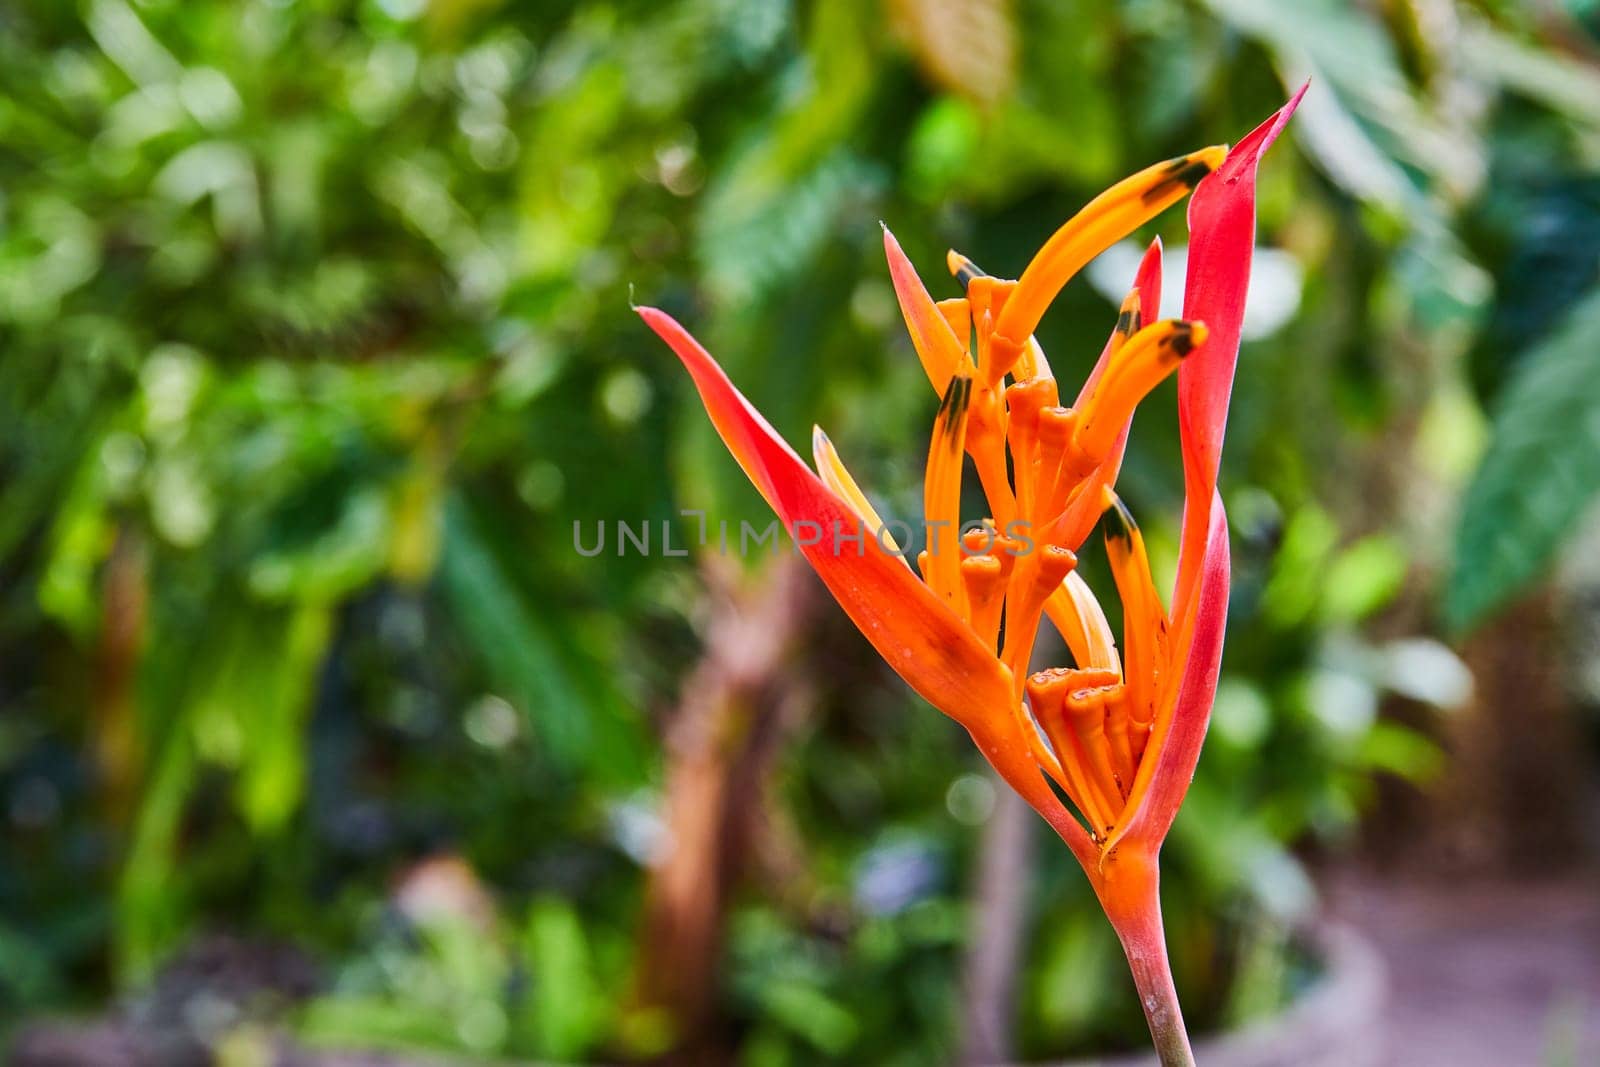 Vibrant Heliconia with Dew Drops in Tropical Garden Setting by njproductions